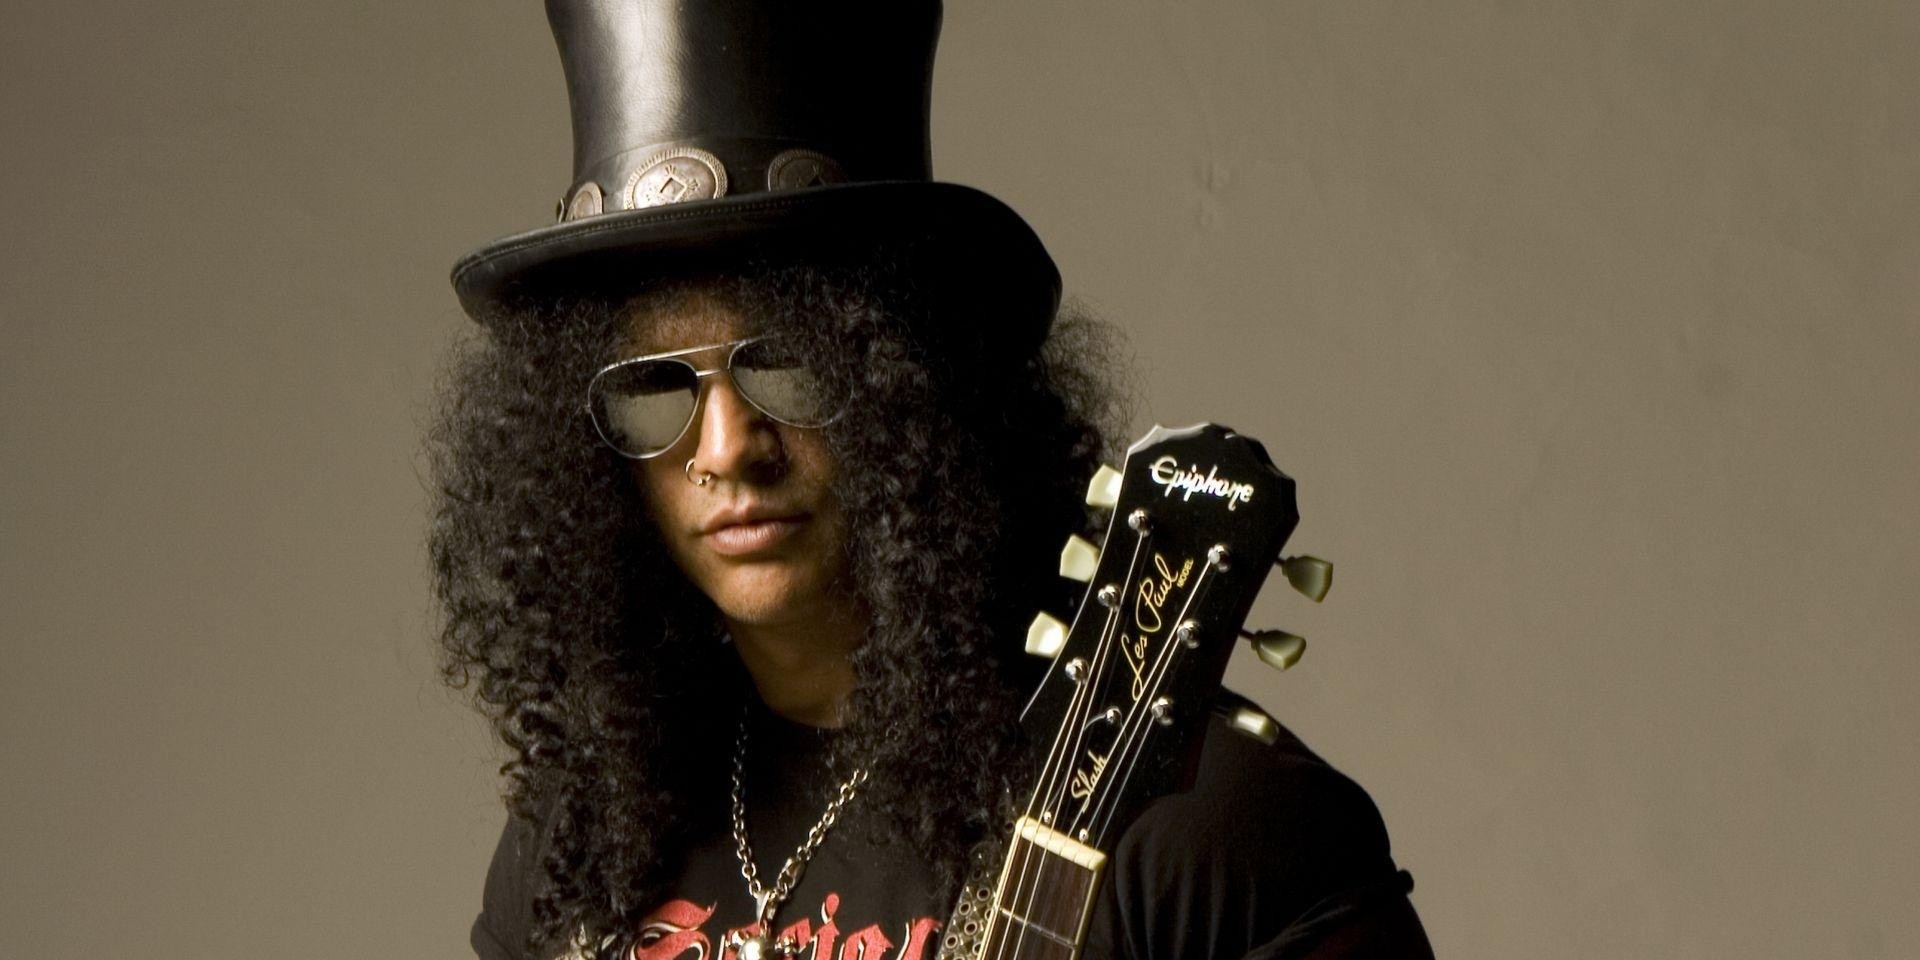 "We didn’t cater to the status quo or try to be industry darlings": An interview with Slash